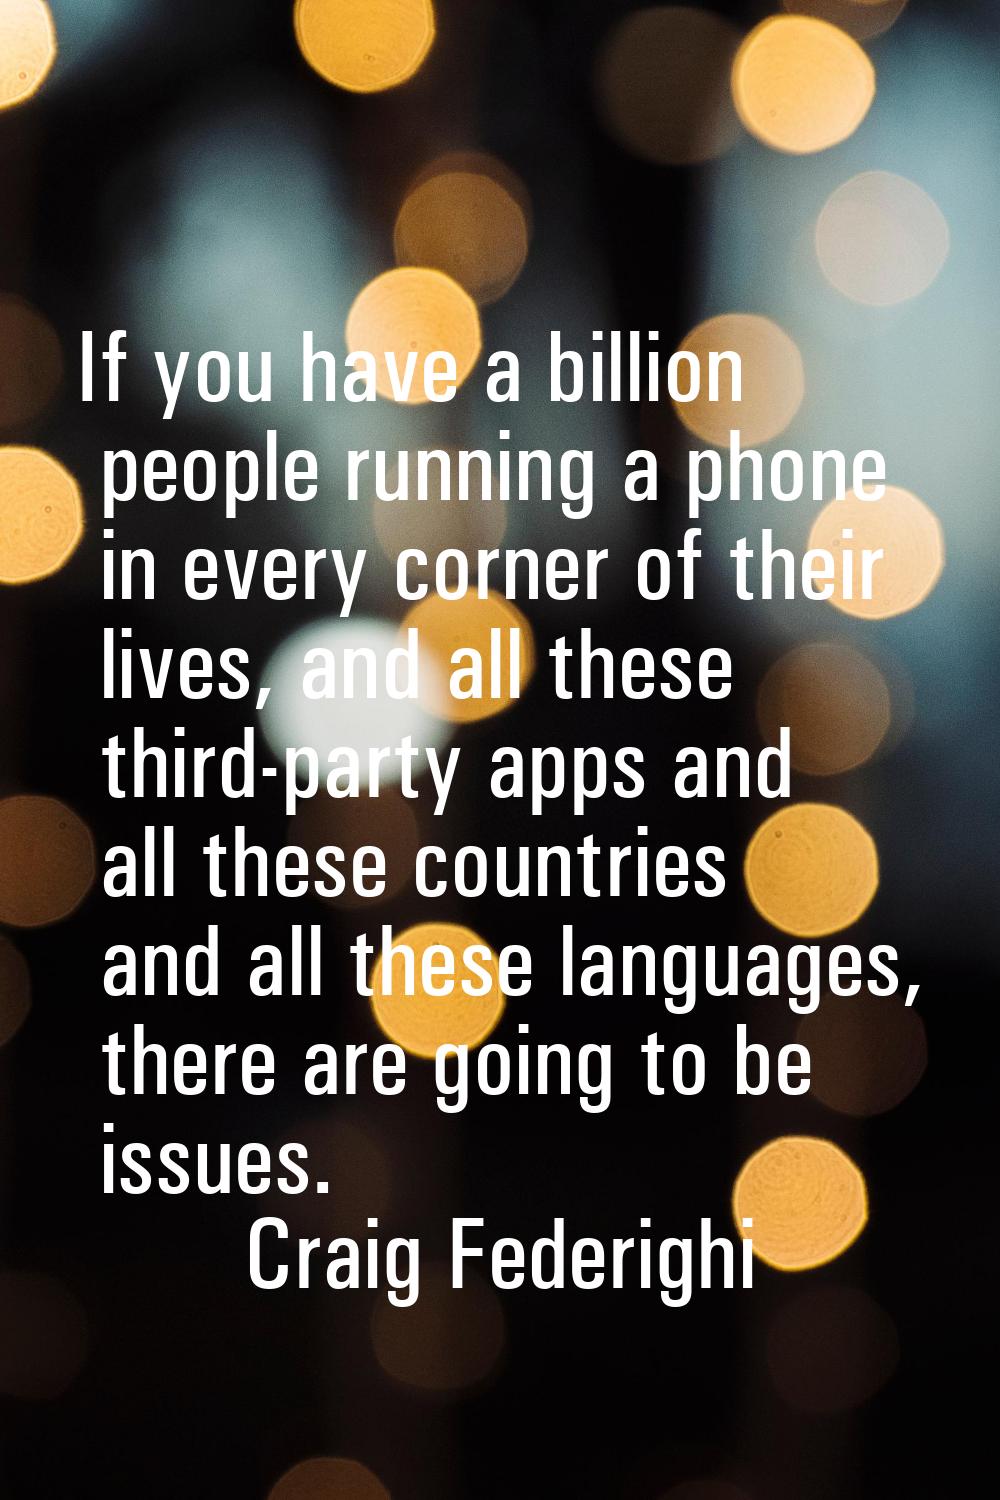 If you have a billion people running a phone in every corner of their lives, and all these third-pa